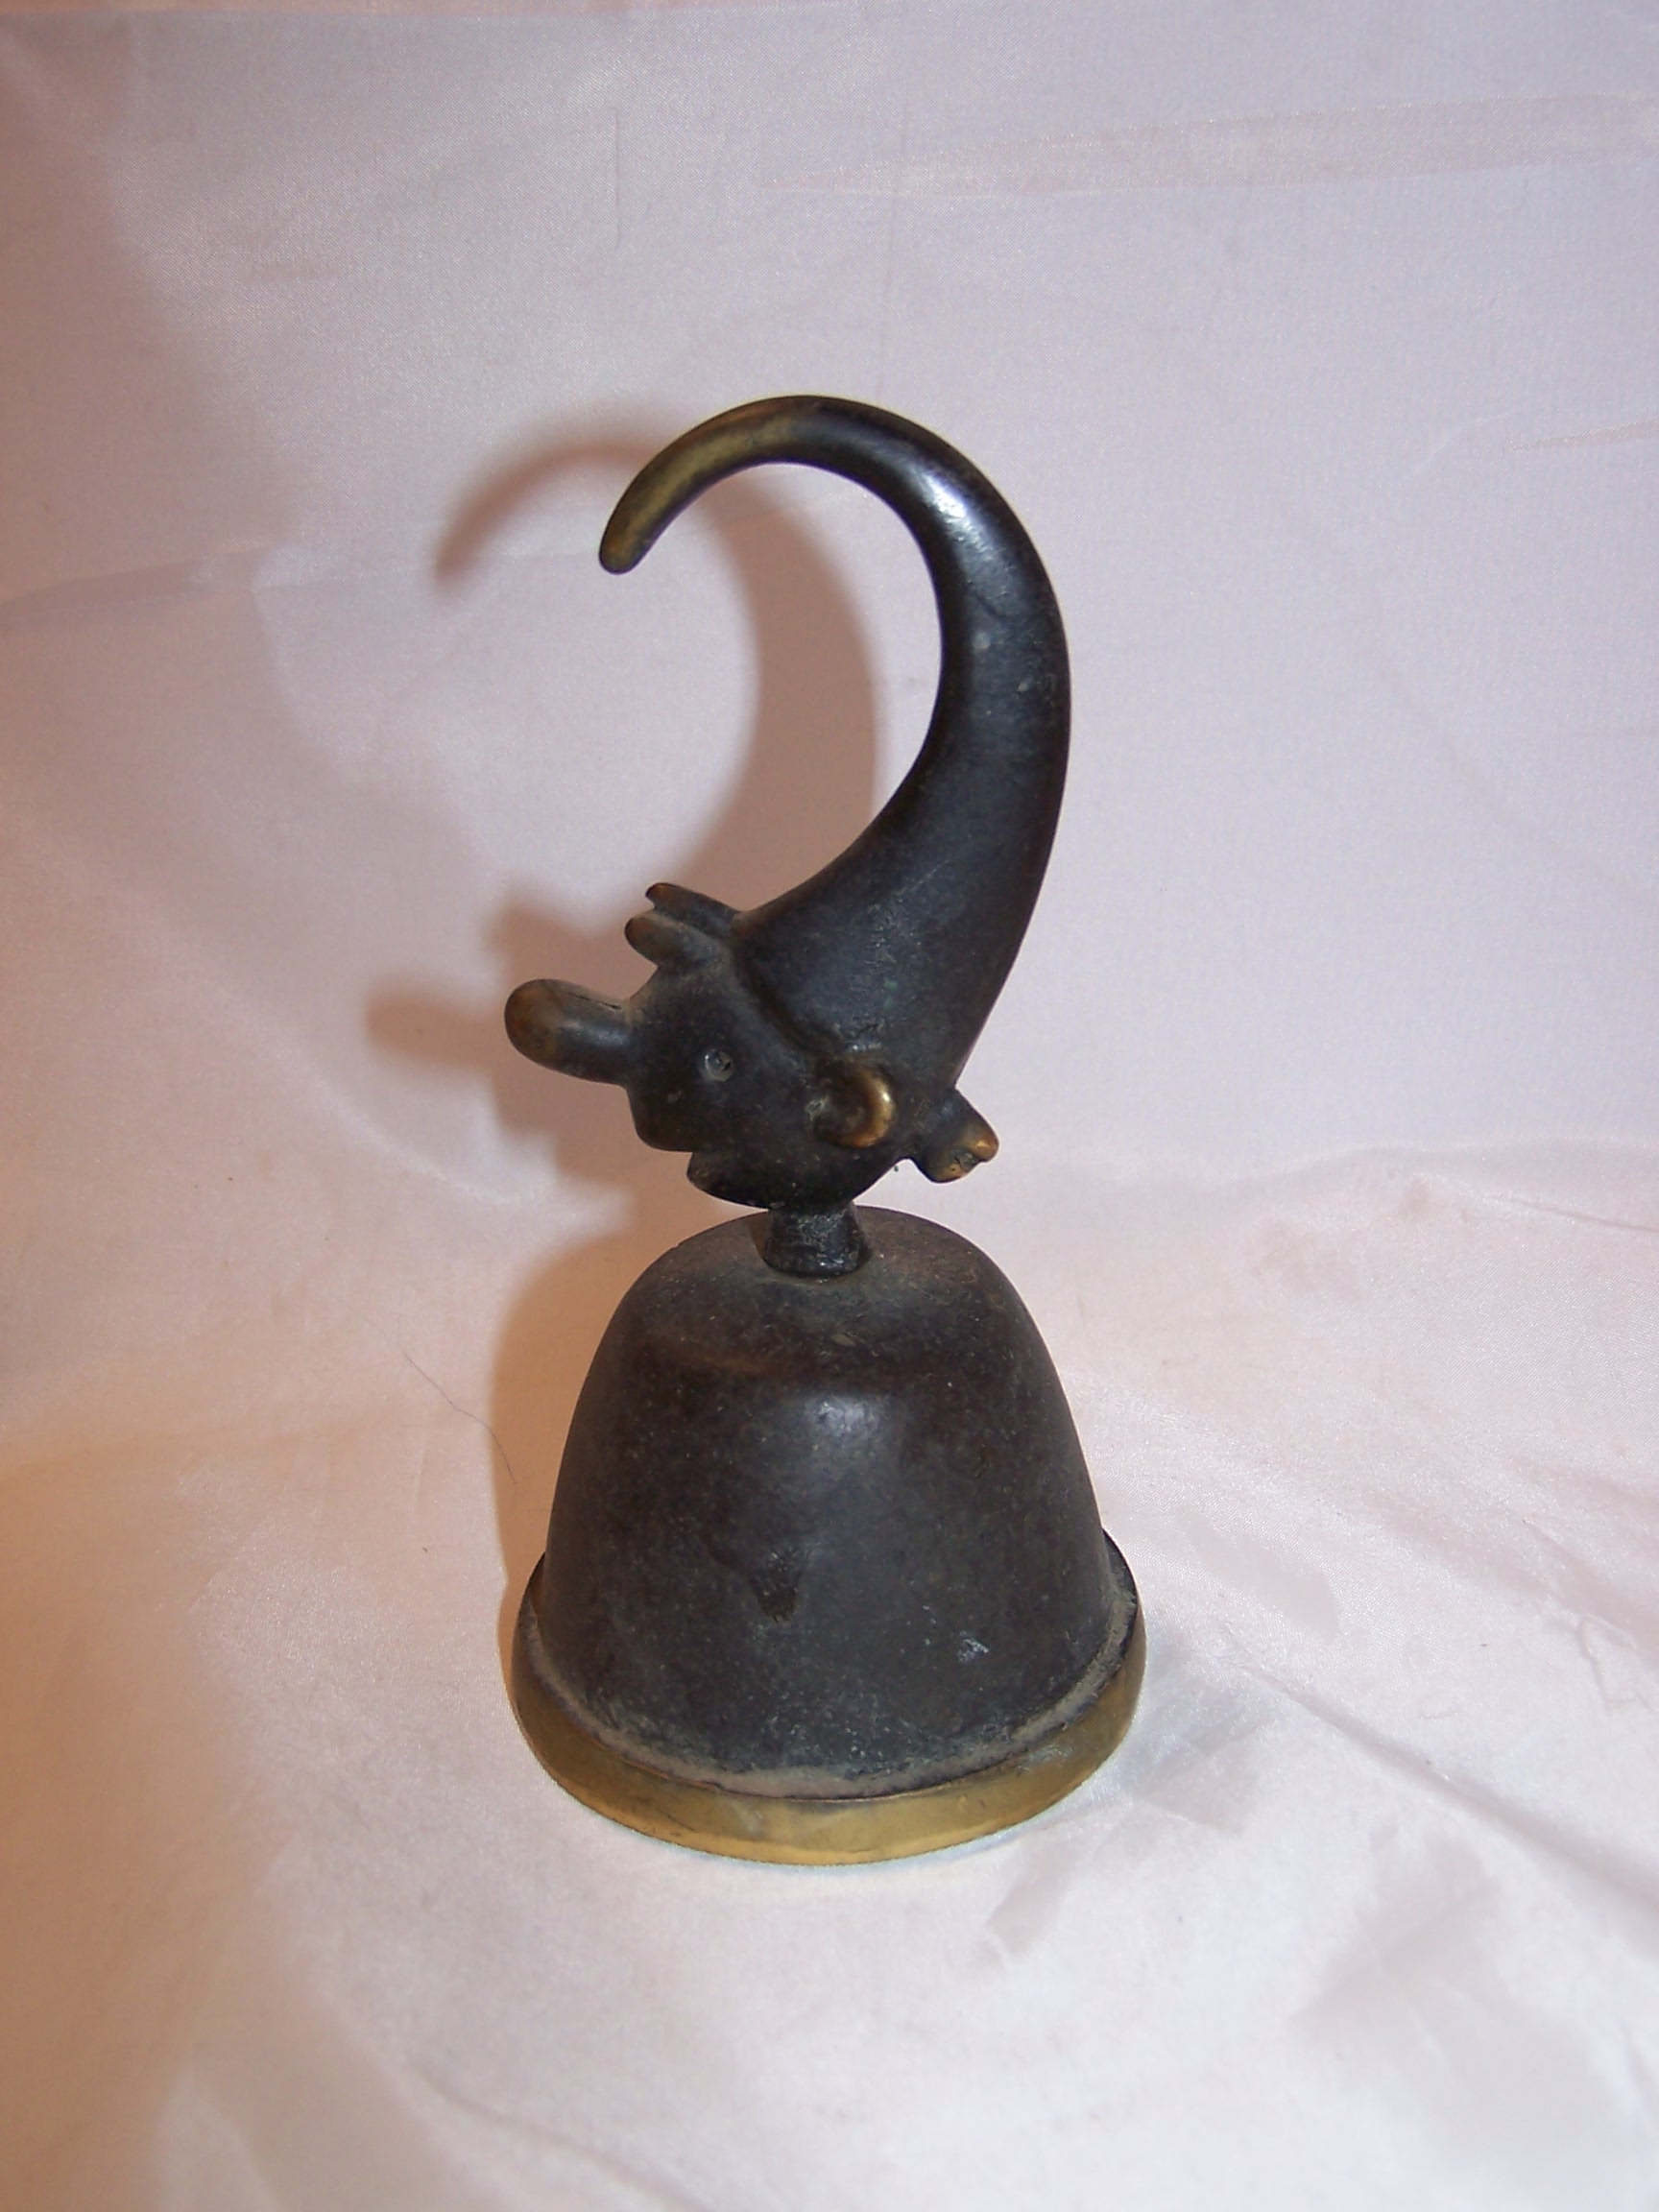 Elf Bell with Curled Tip Cap, Solid Brass, Patina, Vintage